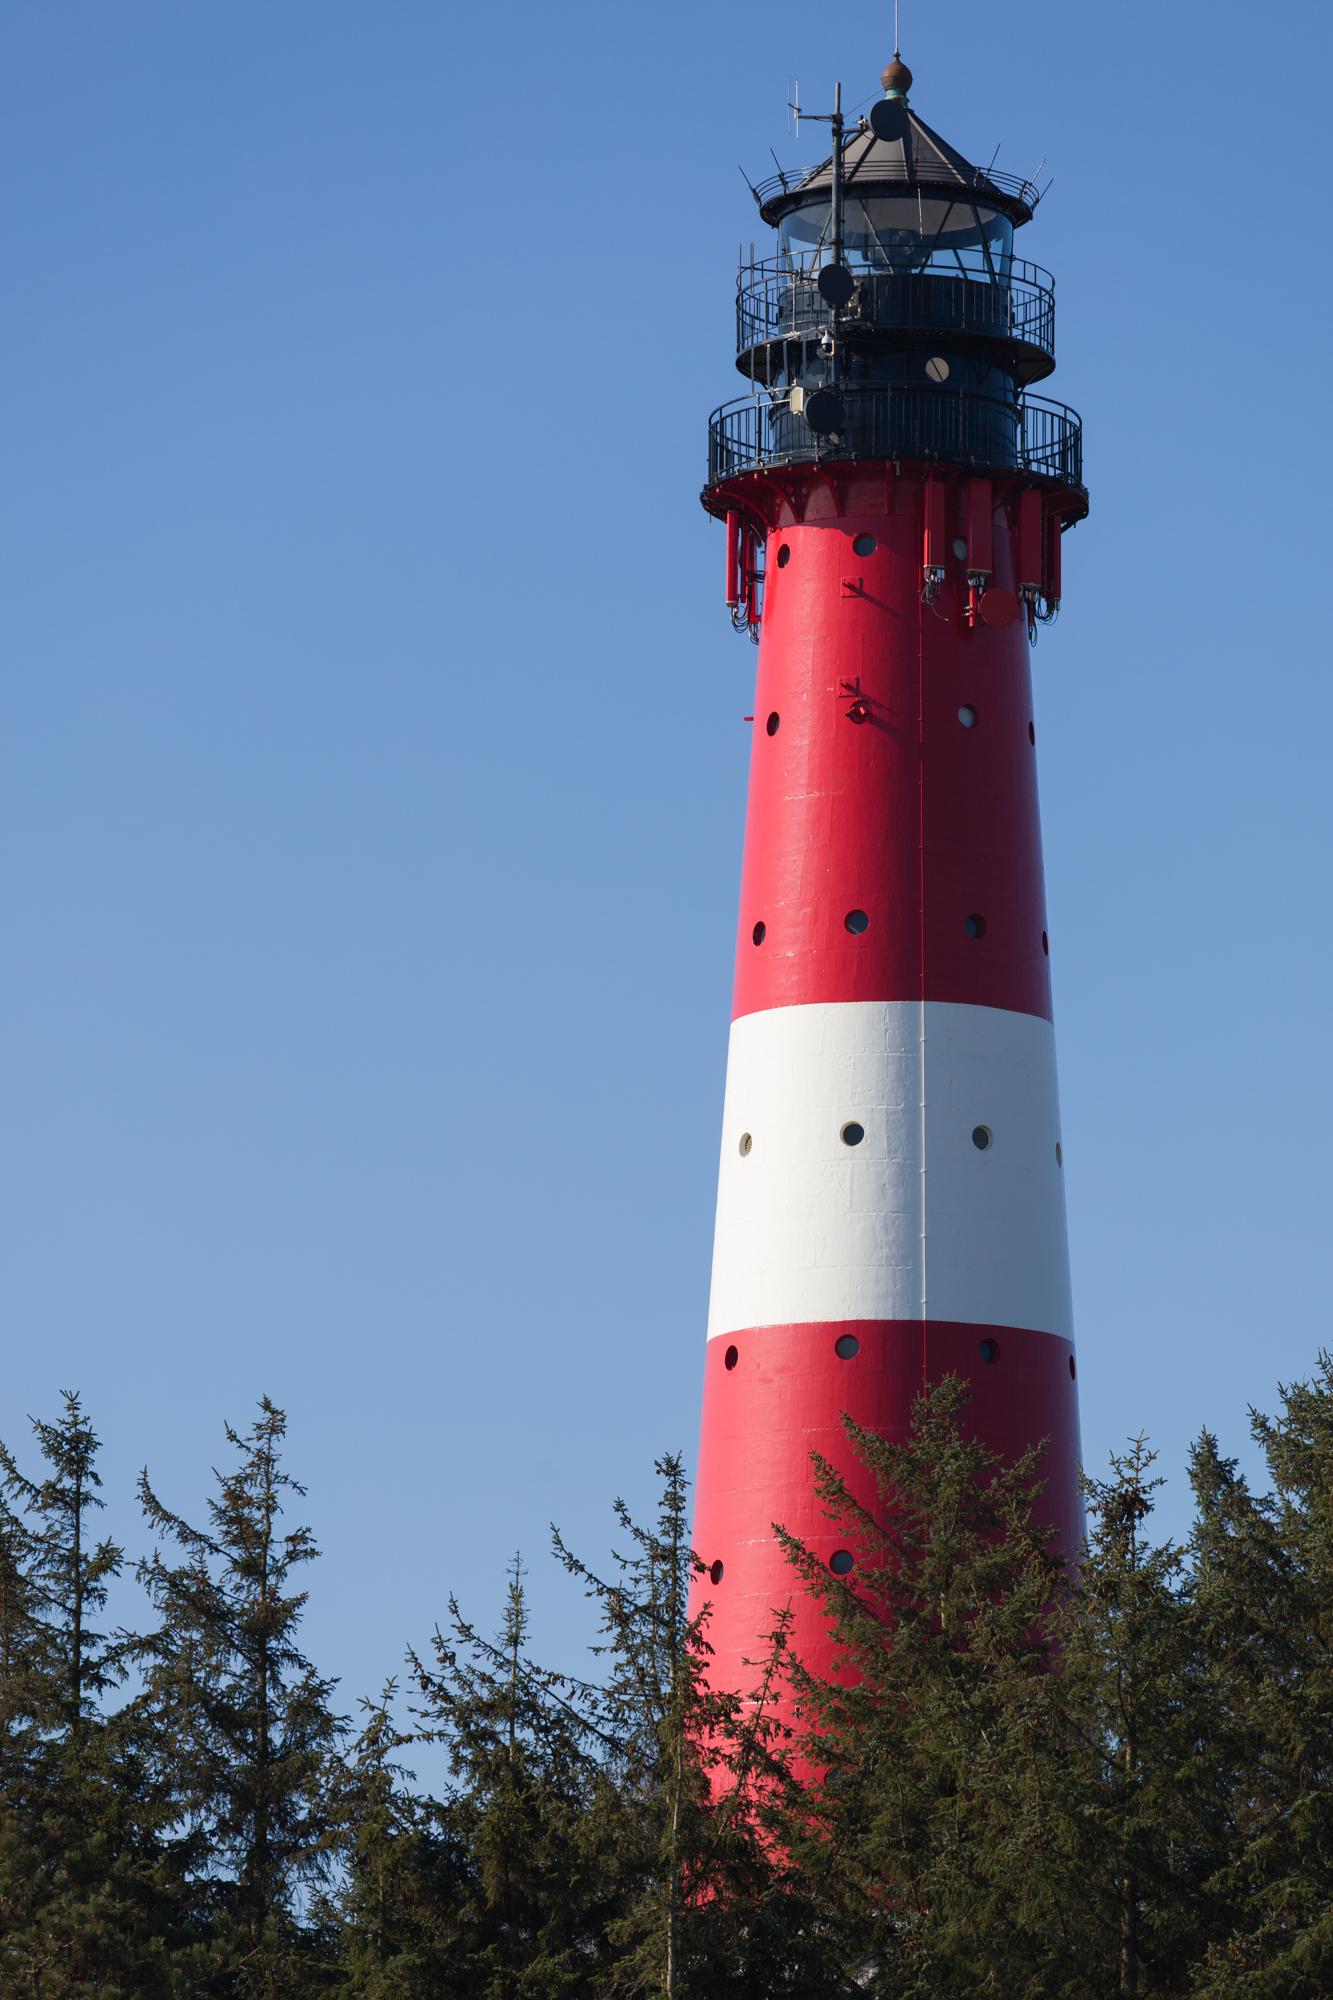 On a sunny day the lighthouse shines in its red and white colours.